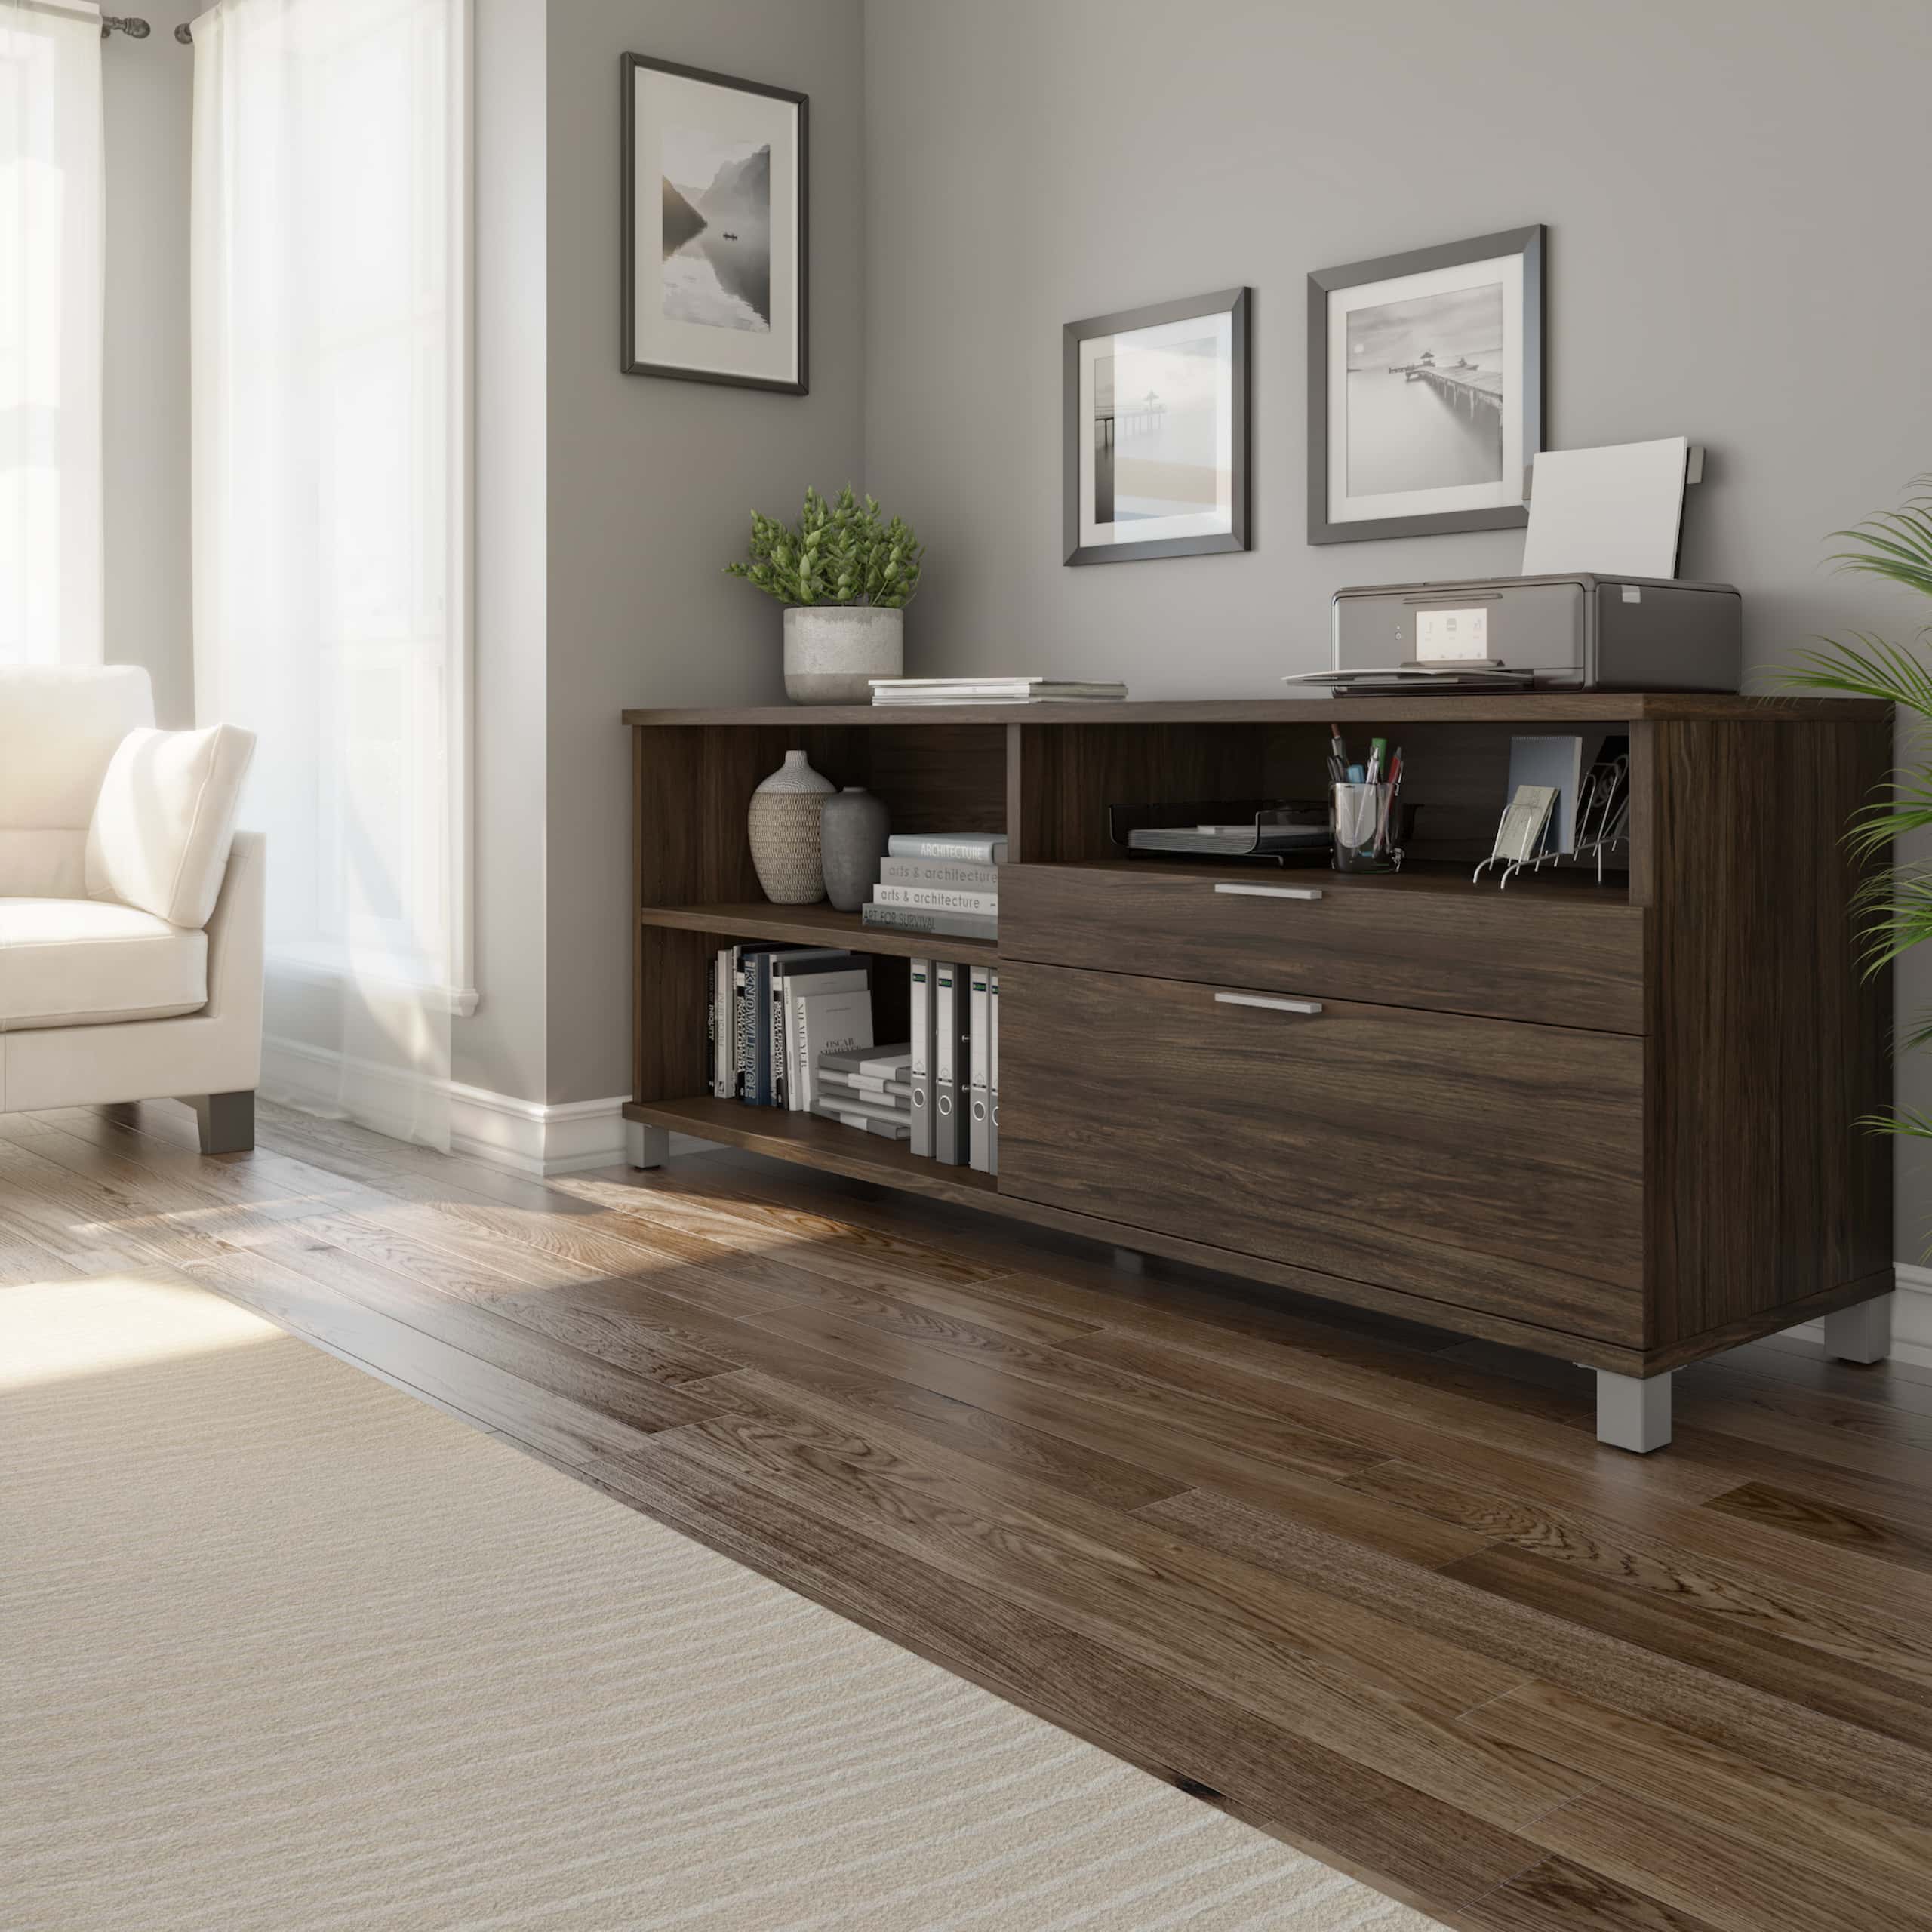 3 Ways to Use a Versatile Office Credenza